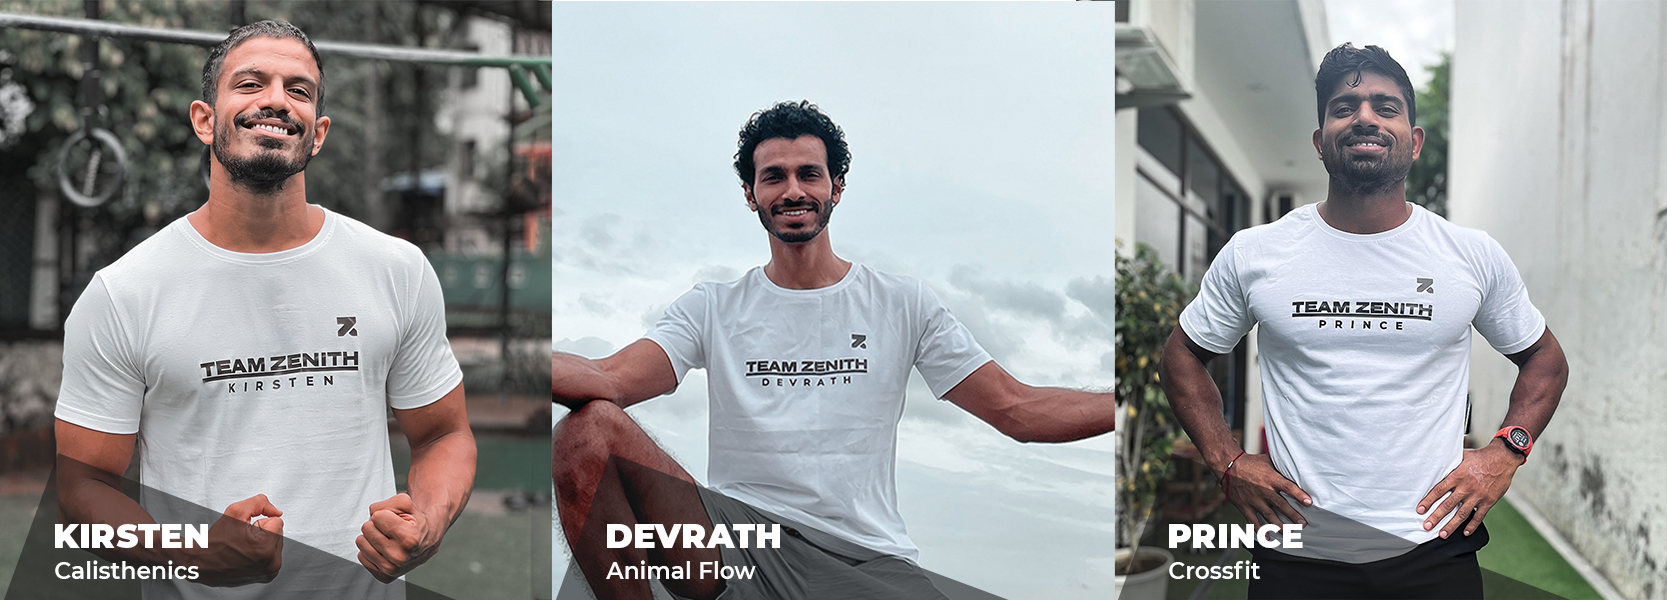 Zymrat signs India’s three top athletes for its Team Zenith project,strengthens the brand philosophy #BuiltByTheCommunity